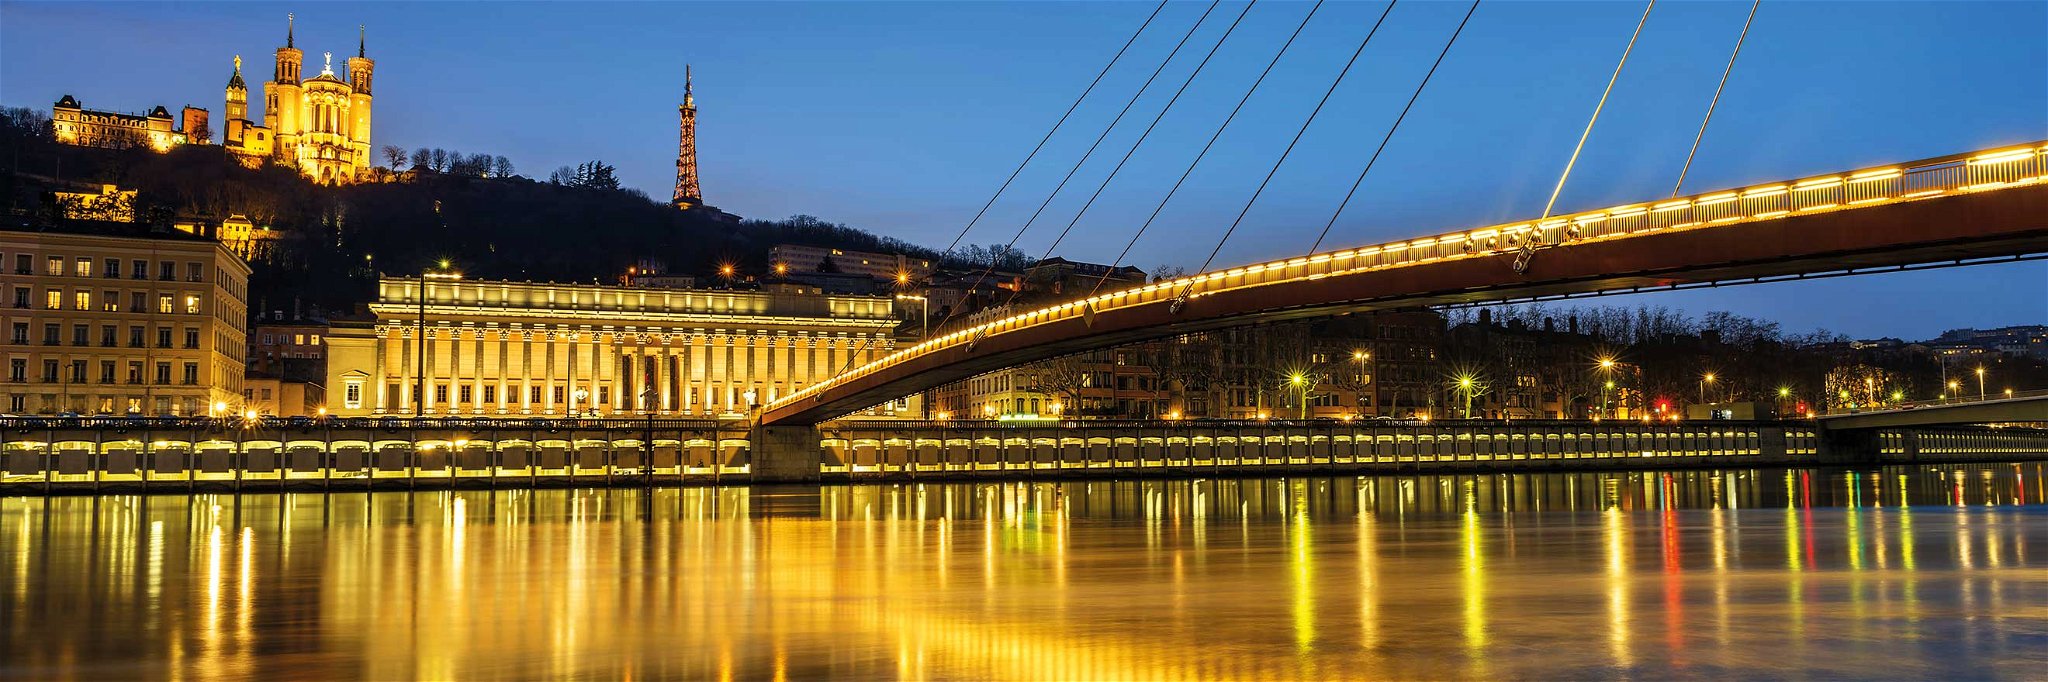 Lyon at night - ever since 1998 its historic centre has been a UNESCO World Heritage site.